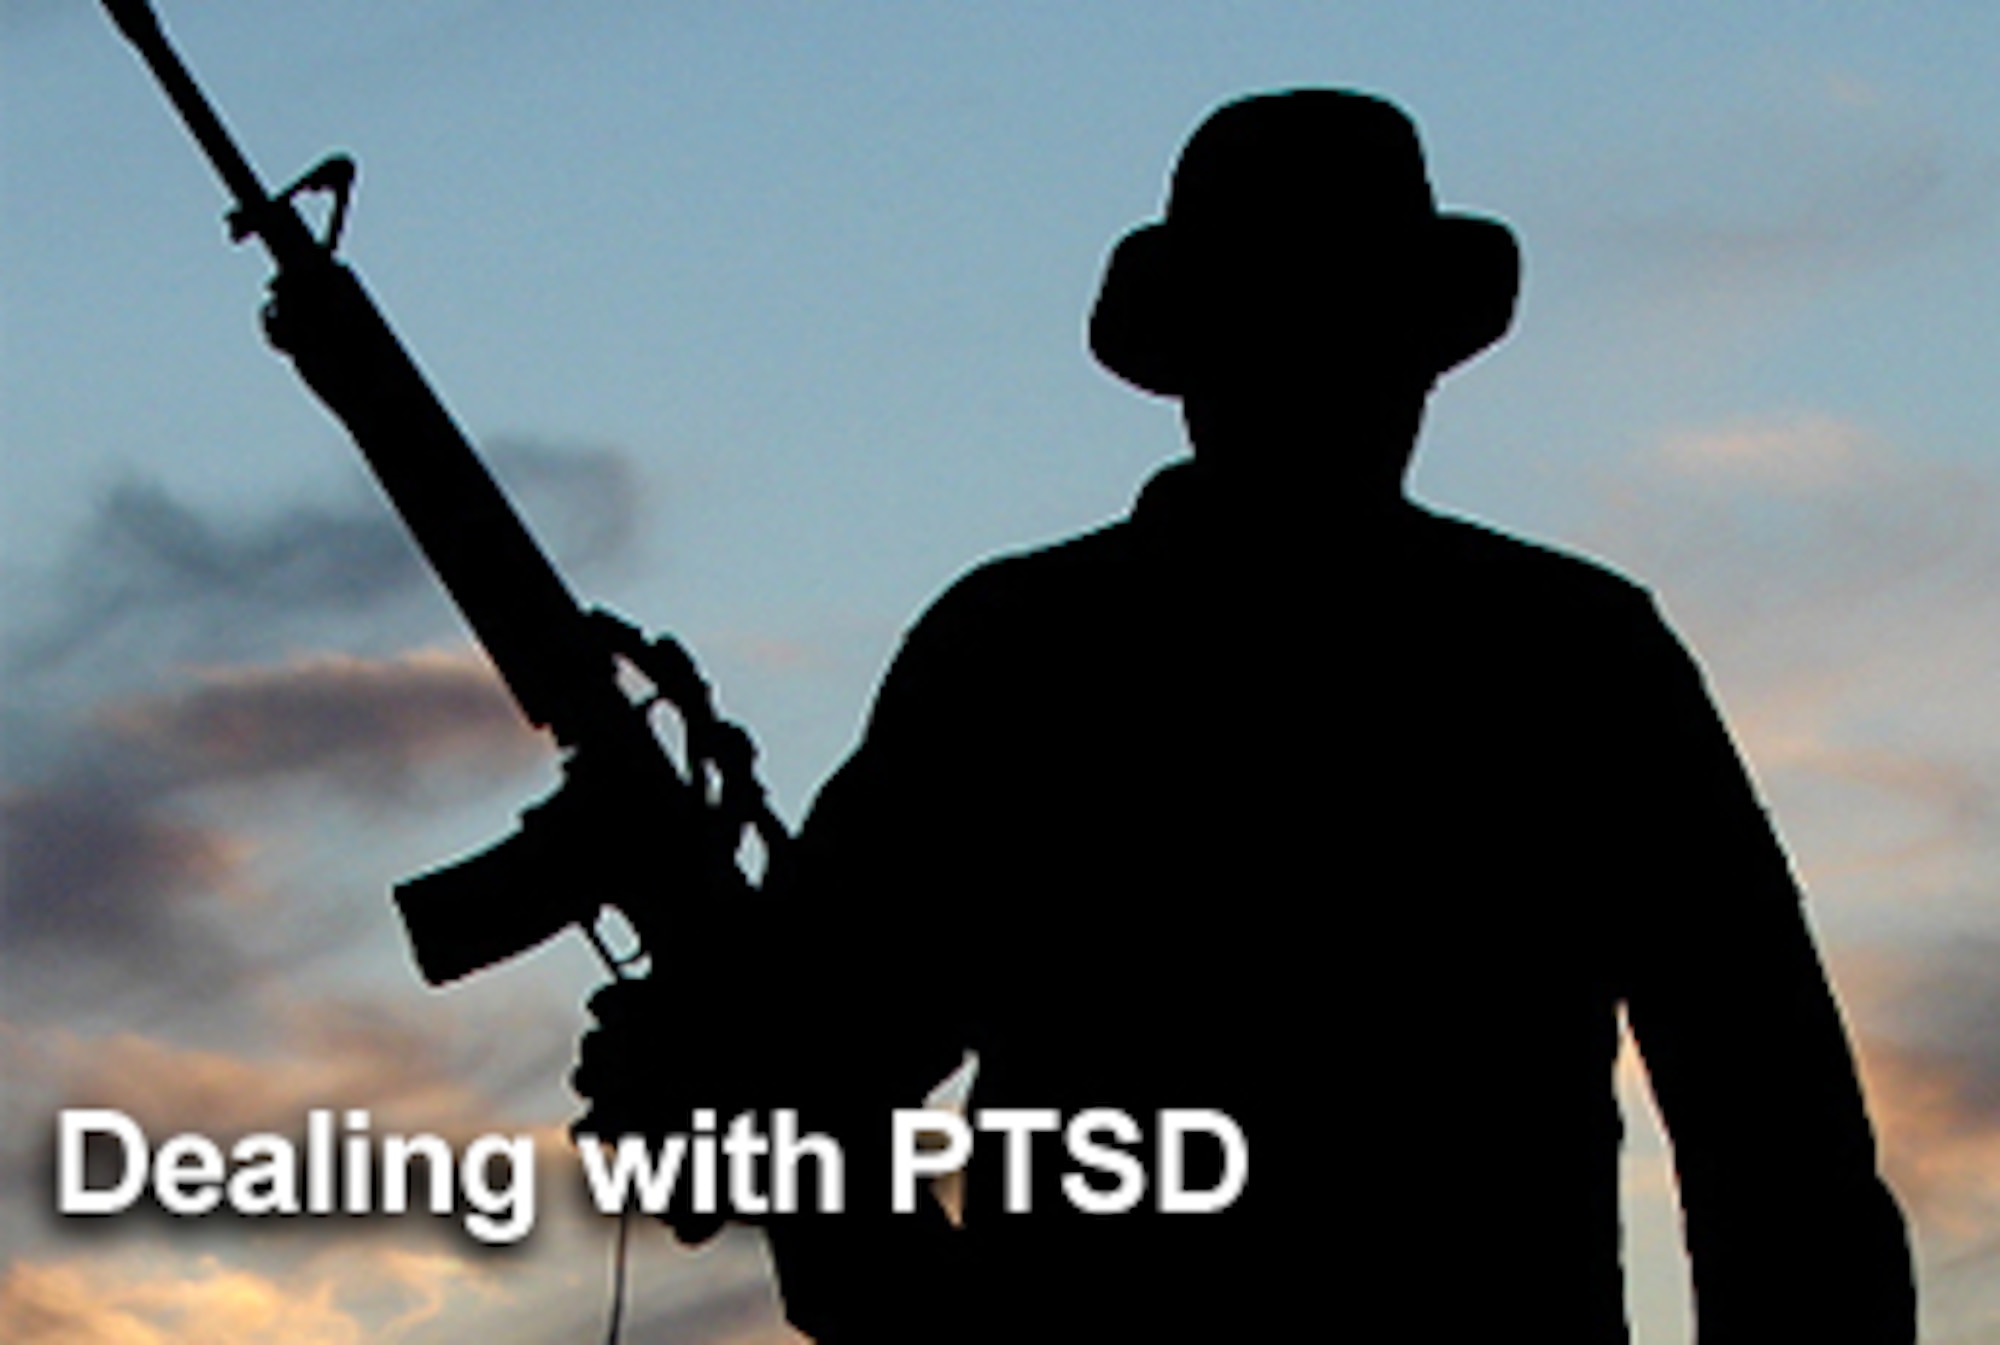 This week's Airman's Roll Call focuses on post traumatic stress disorder and its affects on Airmen. (U.S. Air Force photo illustration/Luke Borland) 
